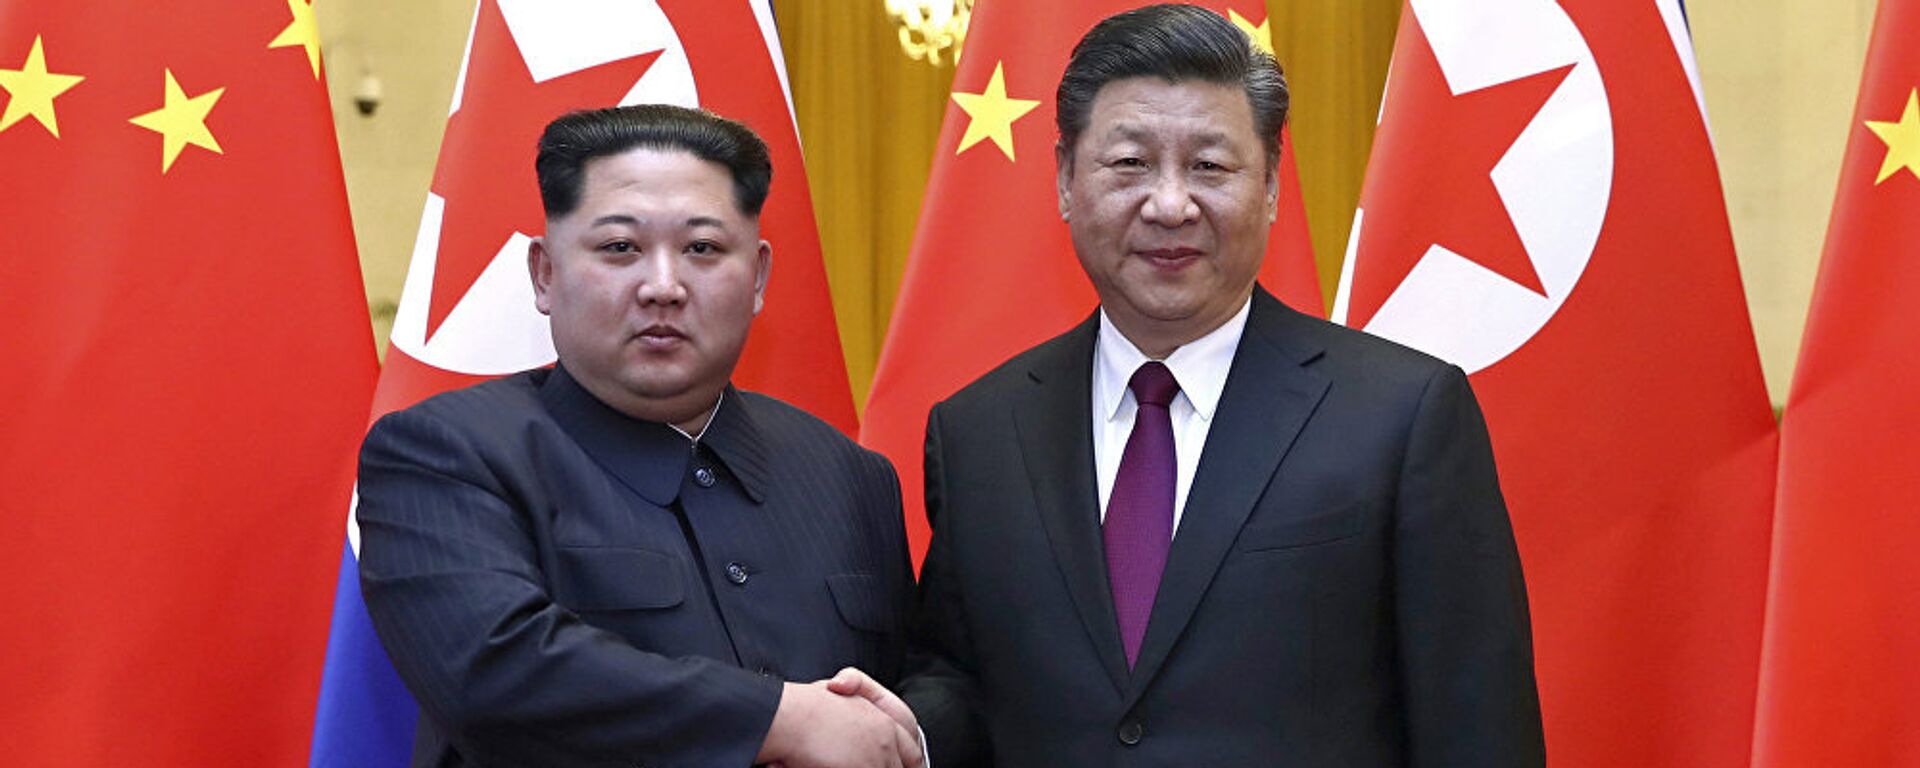 North Korean leader Kim Jong Un, left, and Chinese President Xi Jinping shake hands in Beijing, China. - 俄罗斯卫星通讯社, 1920, 30.07.2021